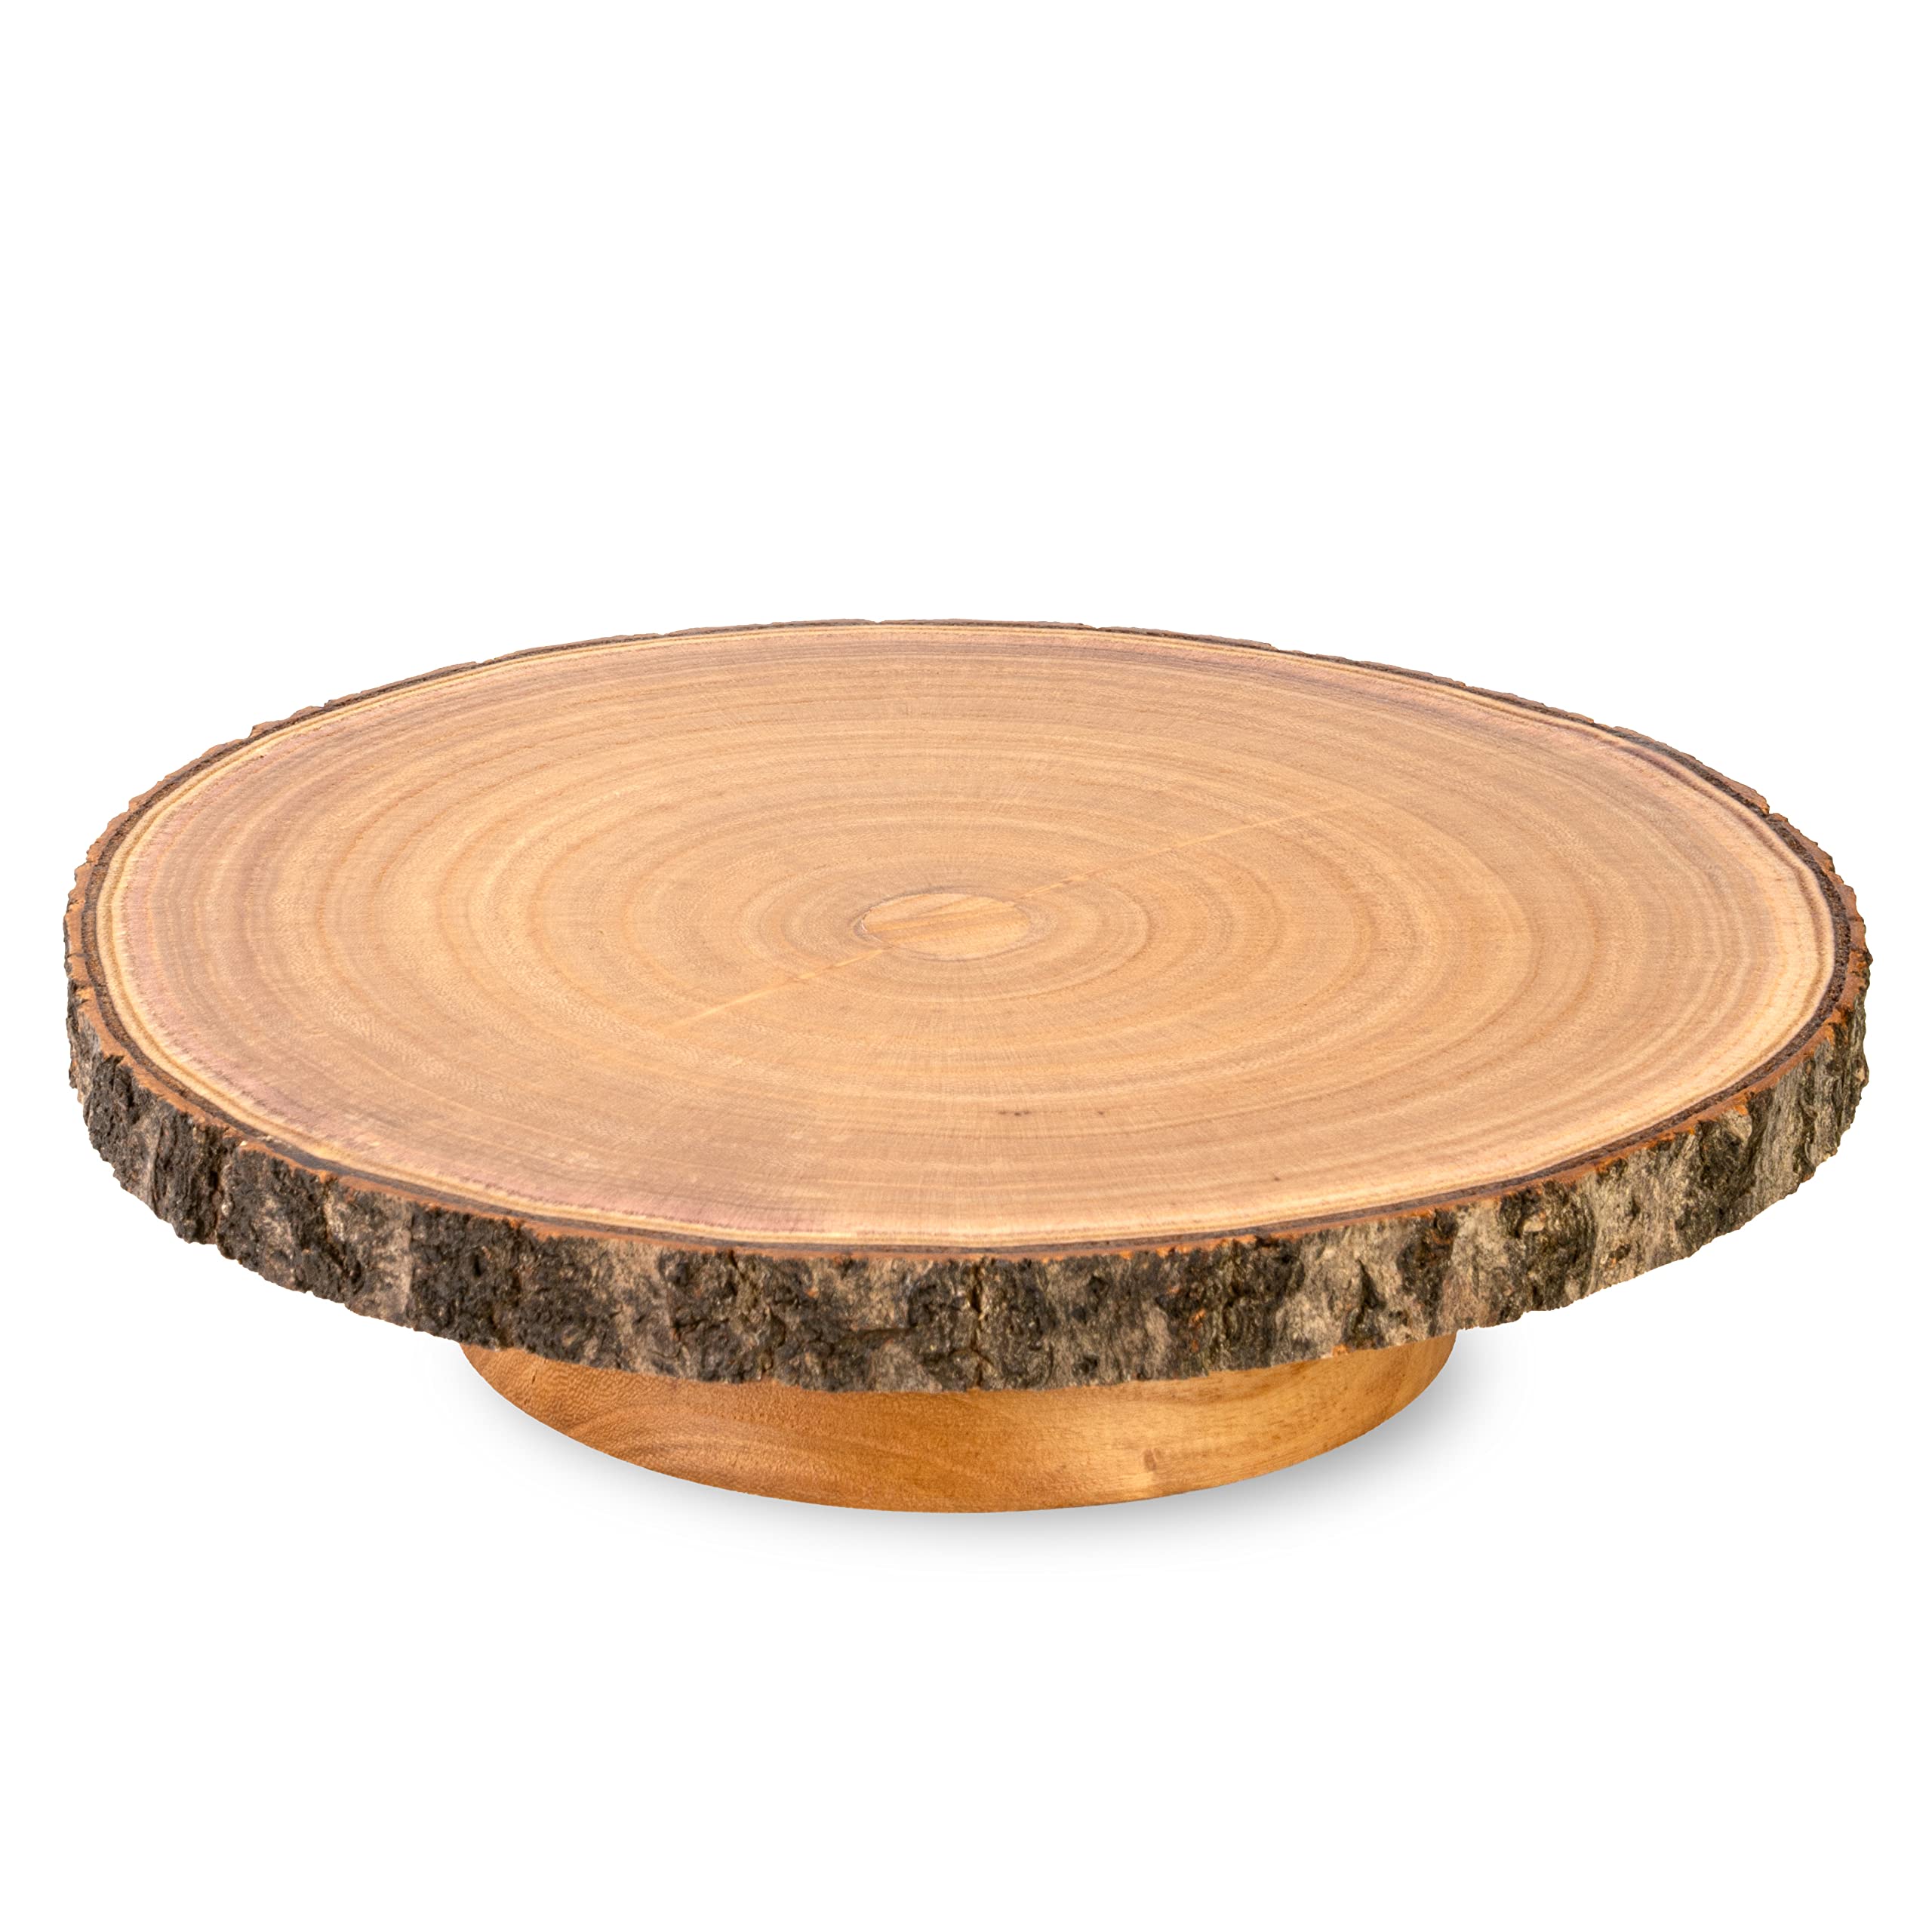 Hanson and Bennett Wooden Rustic Cake Stand - Beautiful and Natural Rustic Wedding Cake Stand - Smooth, Finished Wood Cake Stand